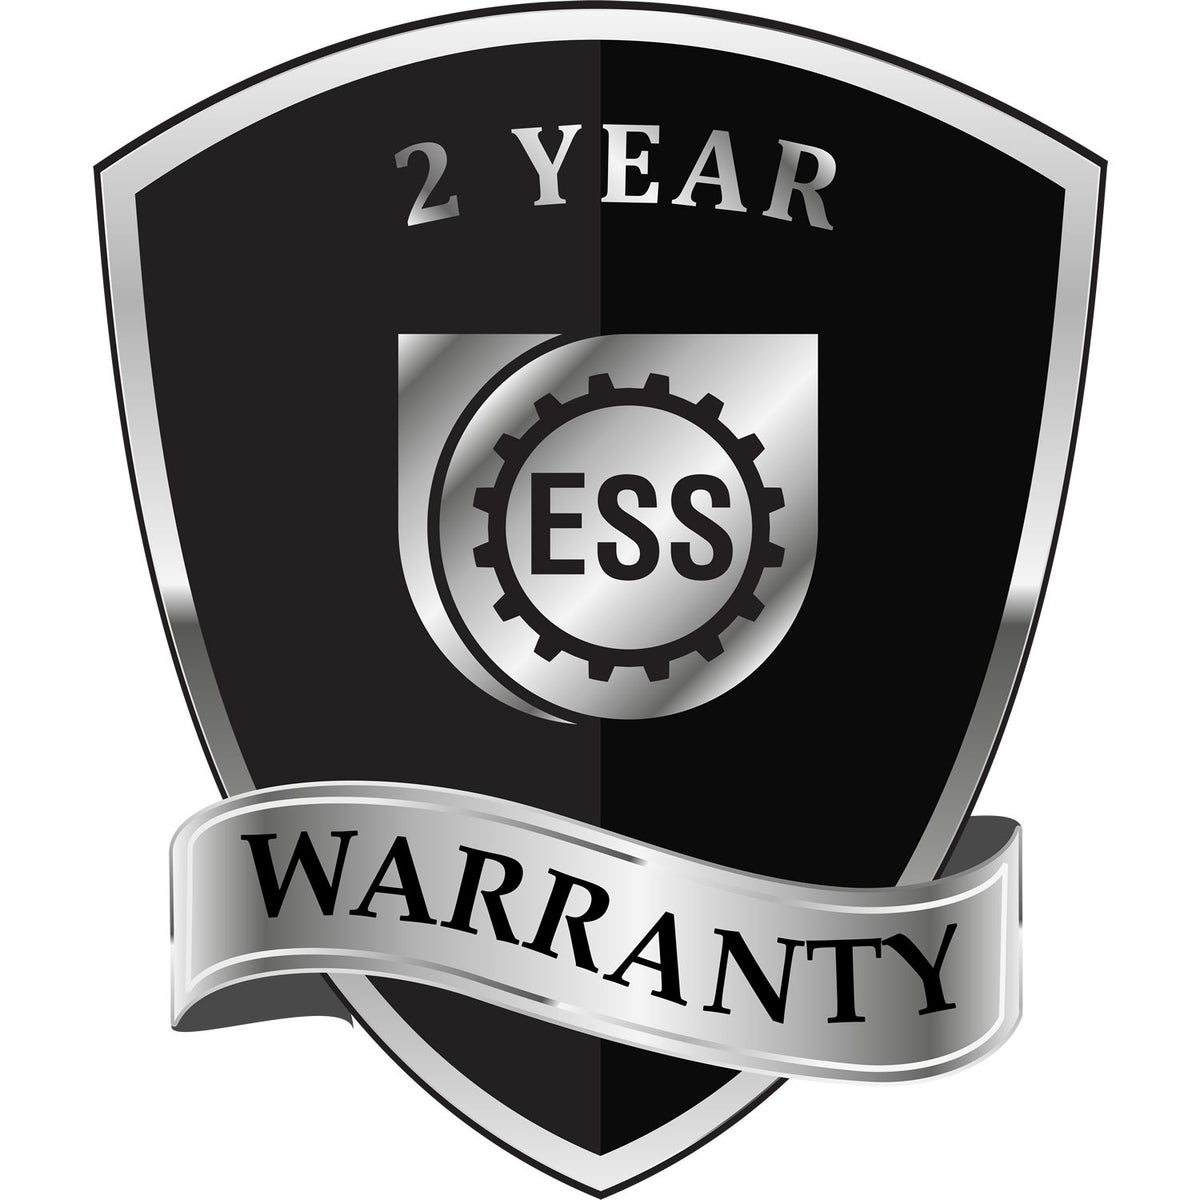 A black and silver badge or emblem showing warranty information for the Hybrid Georgia Geologist Seal